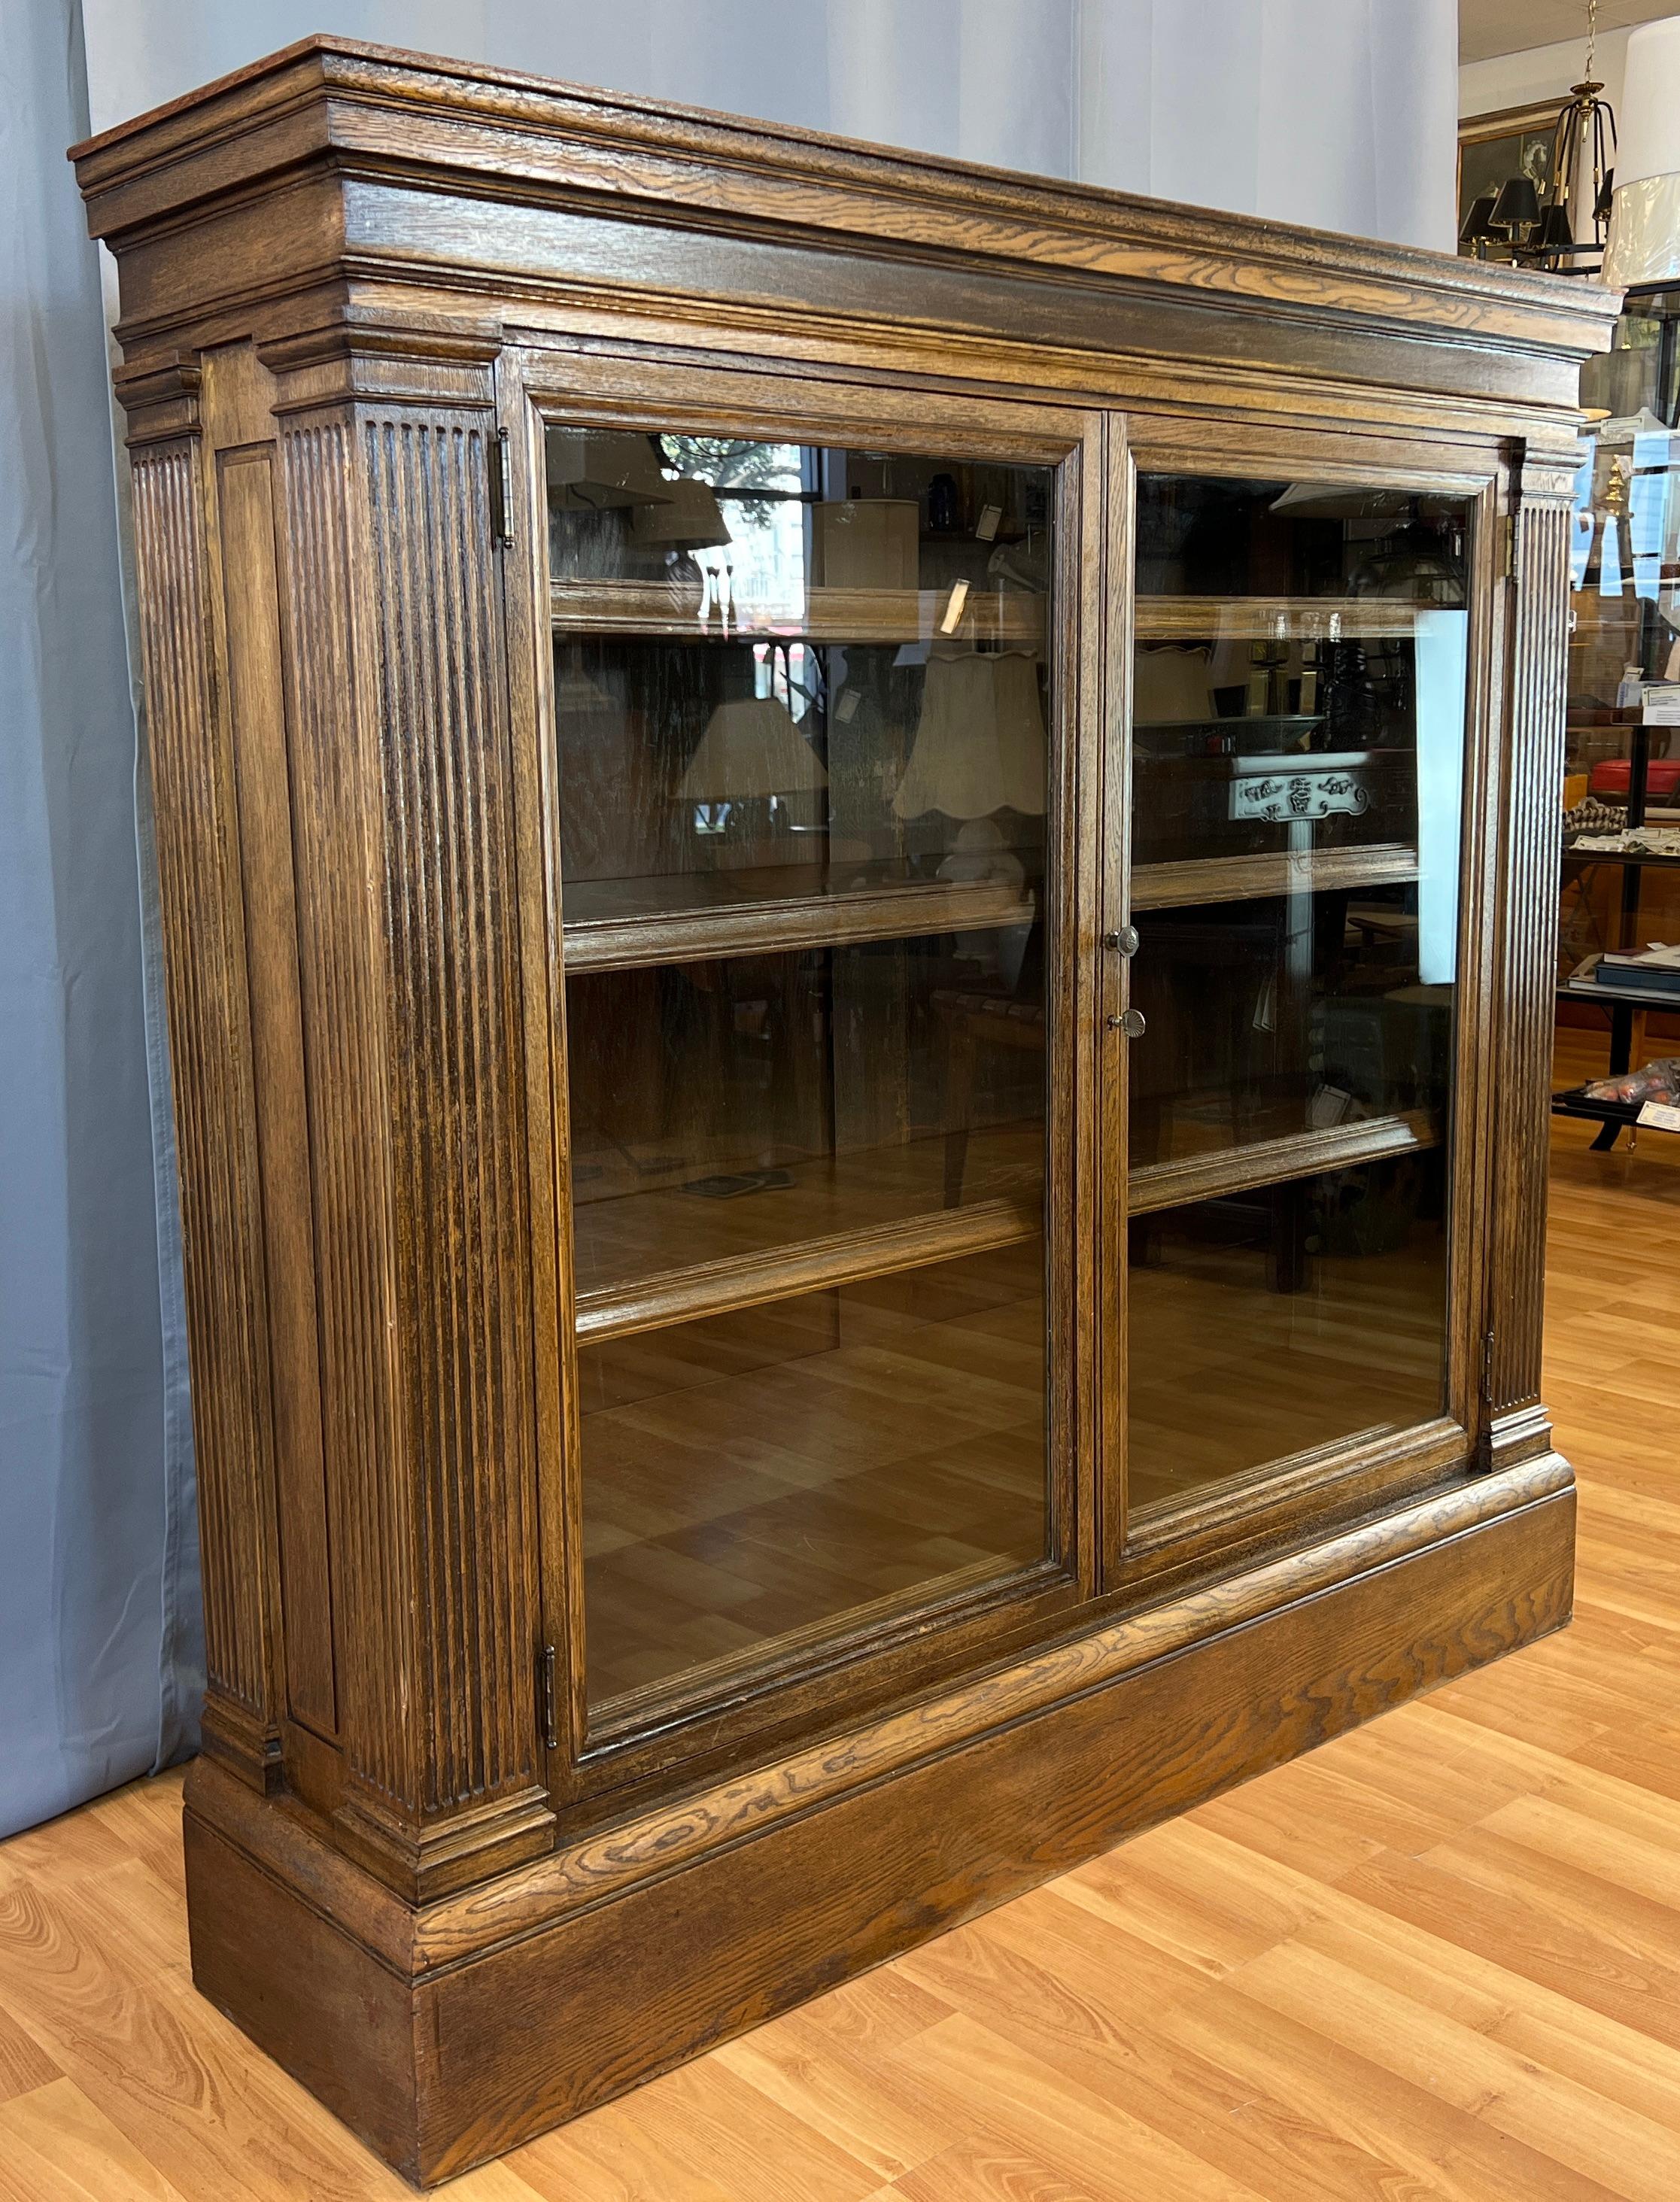 A wonderful circa 1880s double door lawyer's bookcase, we believe the wood is Walnut.
Has it's original glass panes, and key to the door on the right, left door has an inside latch.
Four adjustable shelves, with detailed edges. Shelves are about 9